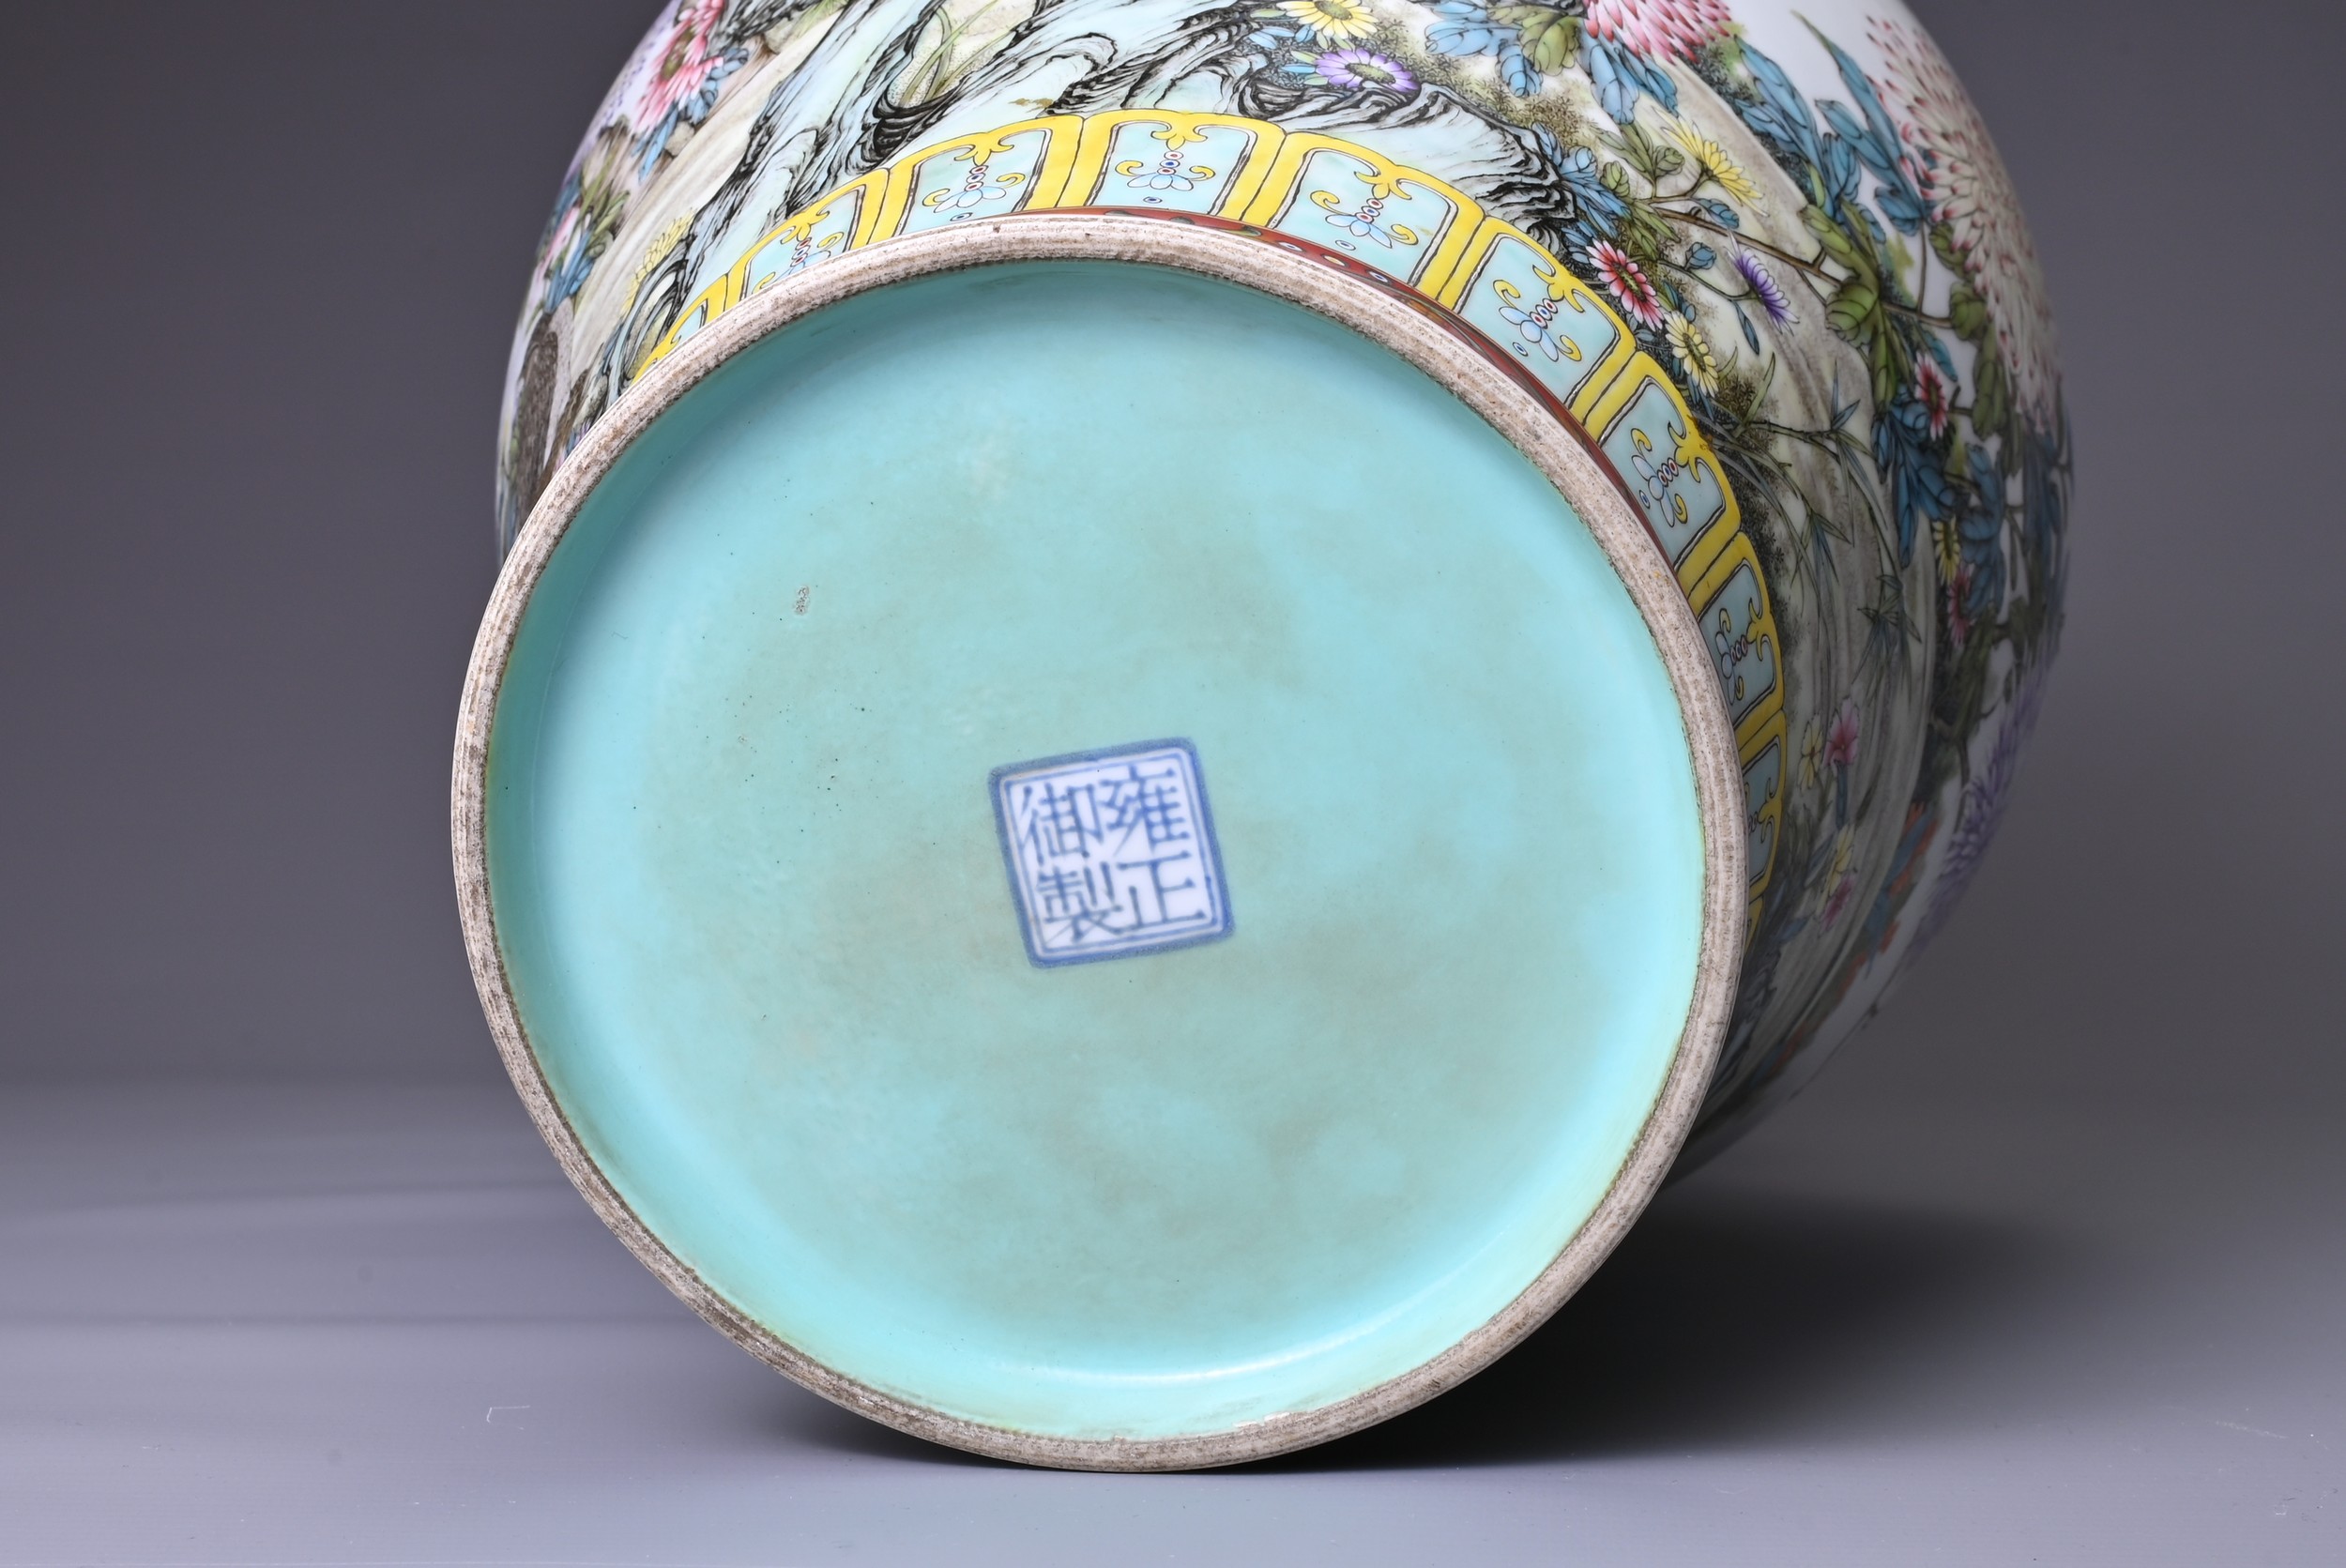 A CHINESE PORCELAIN FAMILLE ROSE RED-GROUND IMPERIAL-STYLE BALUSTER VASE, 20TH CENTURY. With - Image 7 of 9